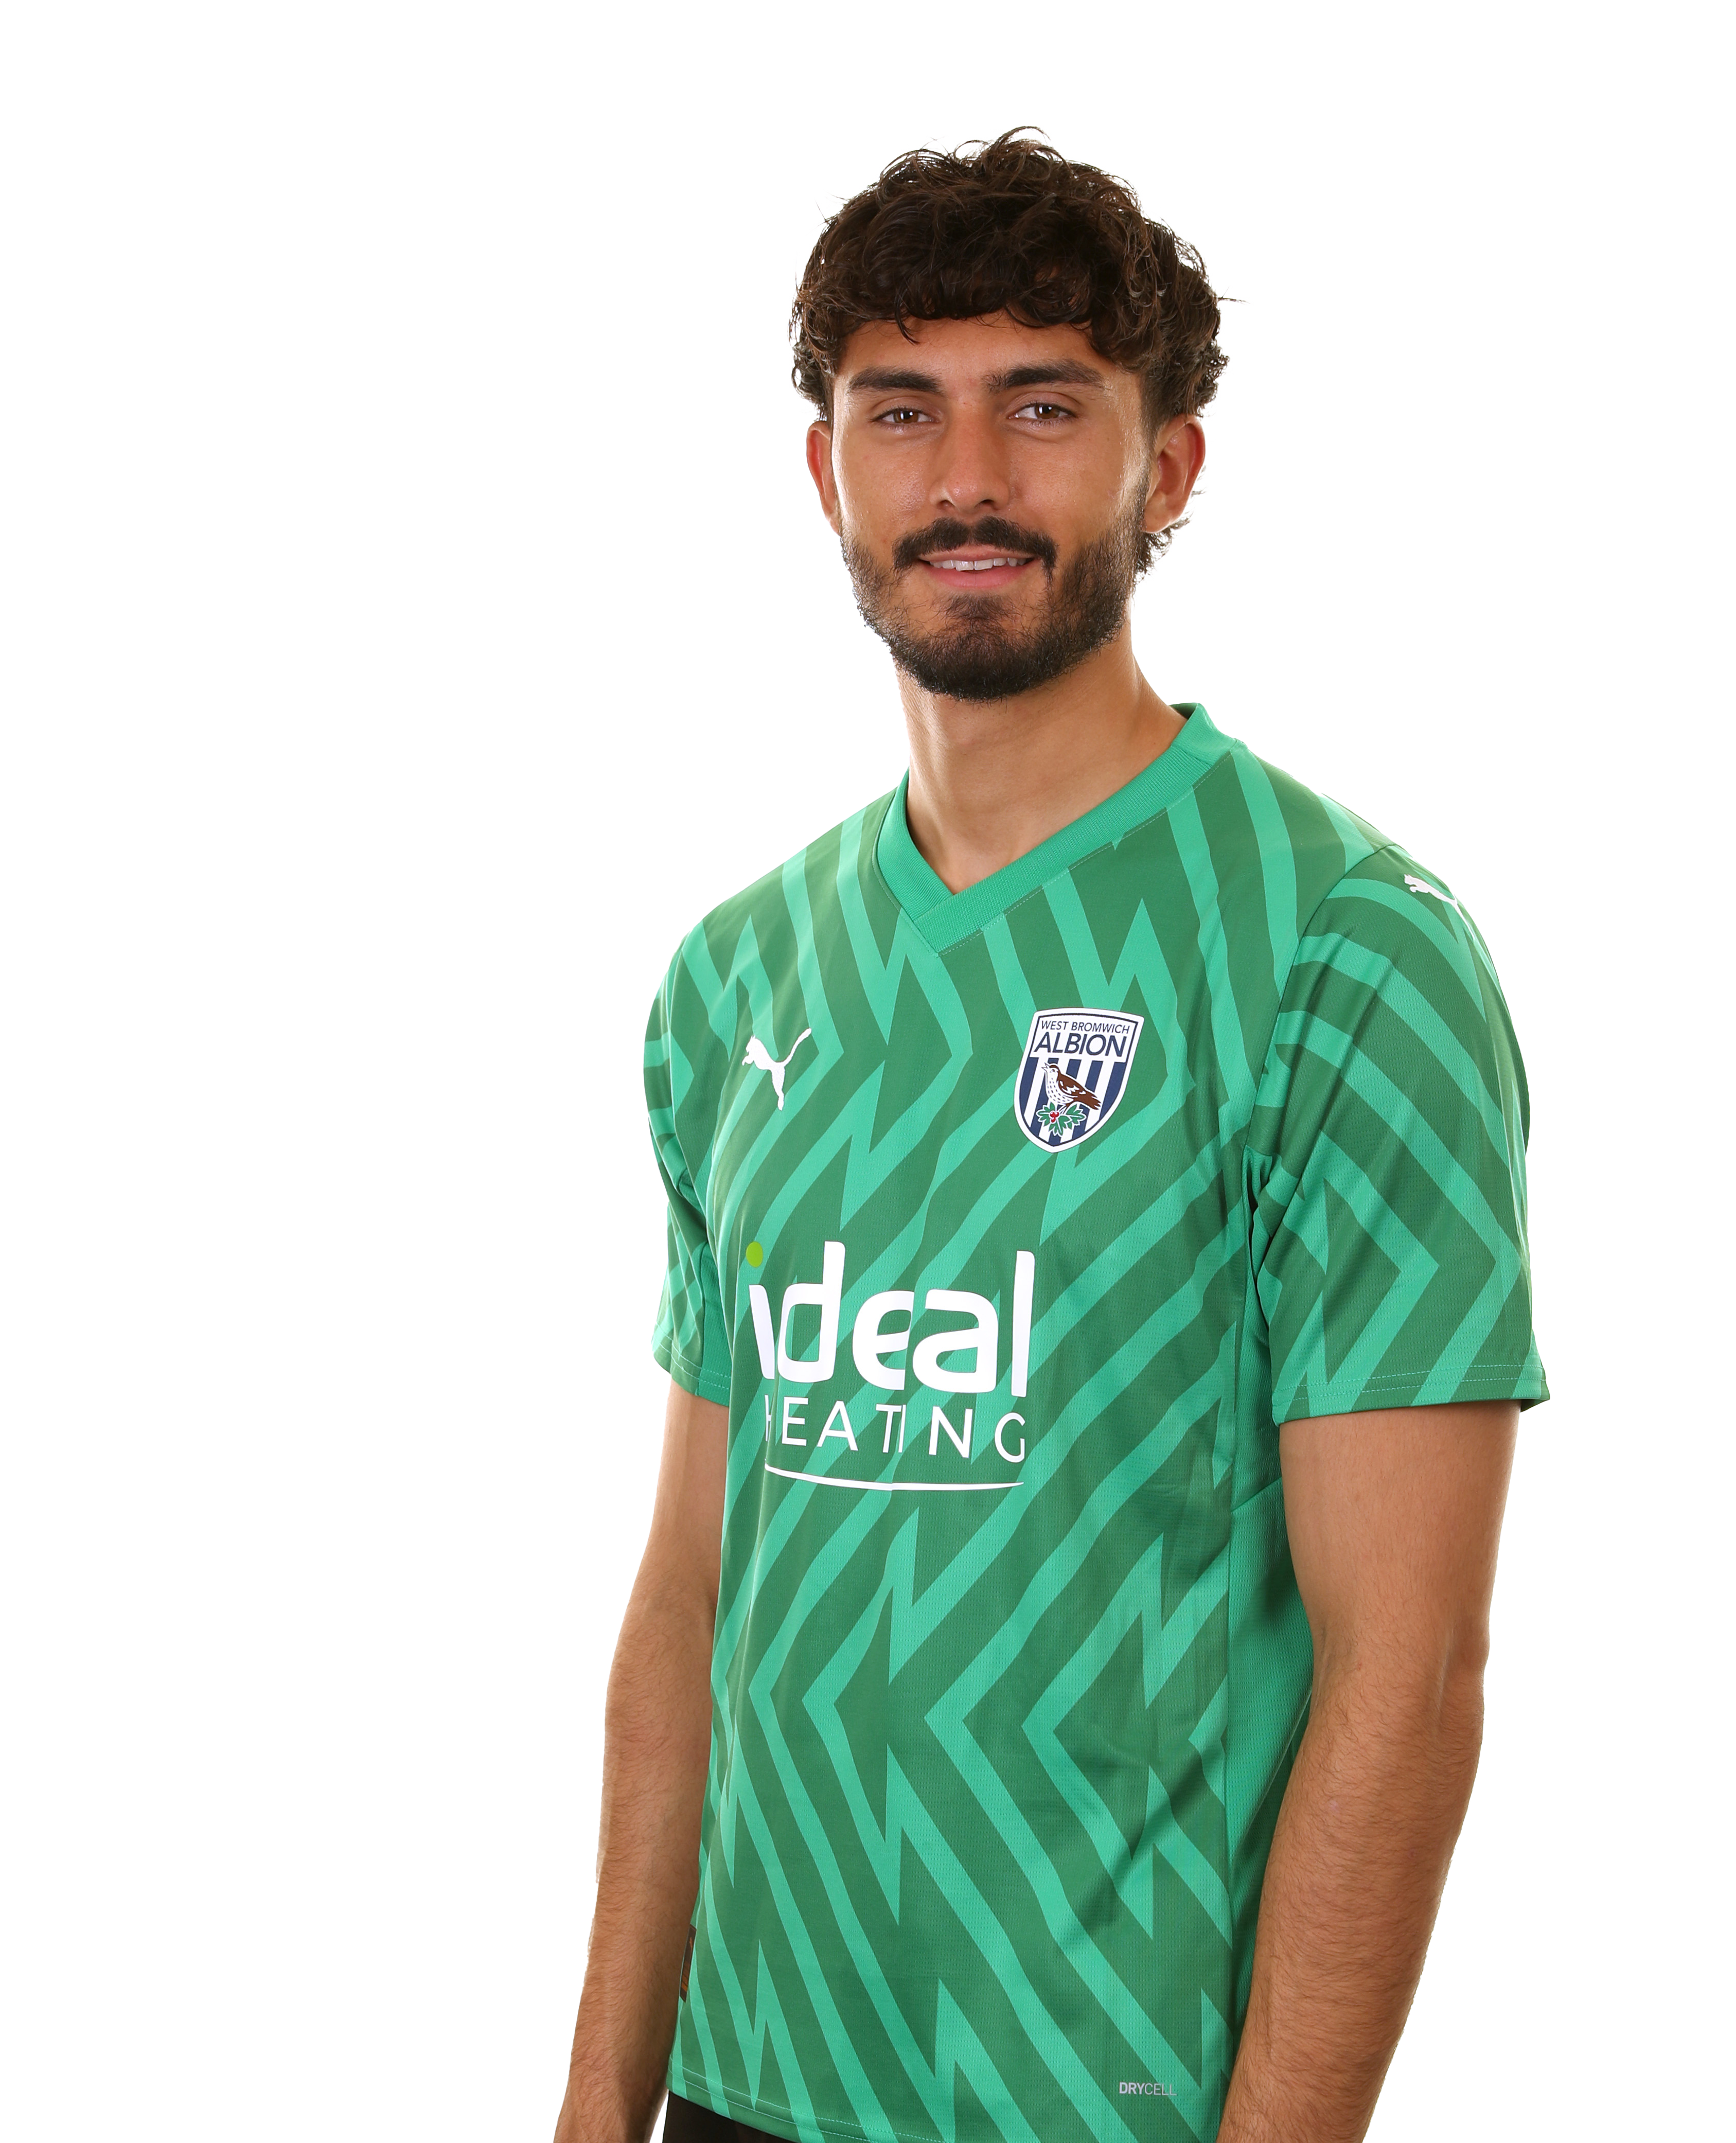 A photo headshot of Albion Under-21s player Brad Foster ahead of the 2023/24 season